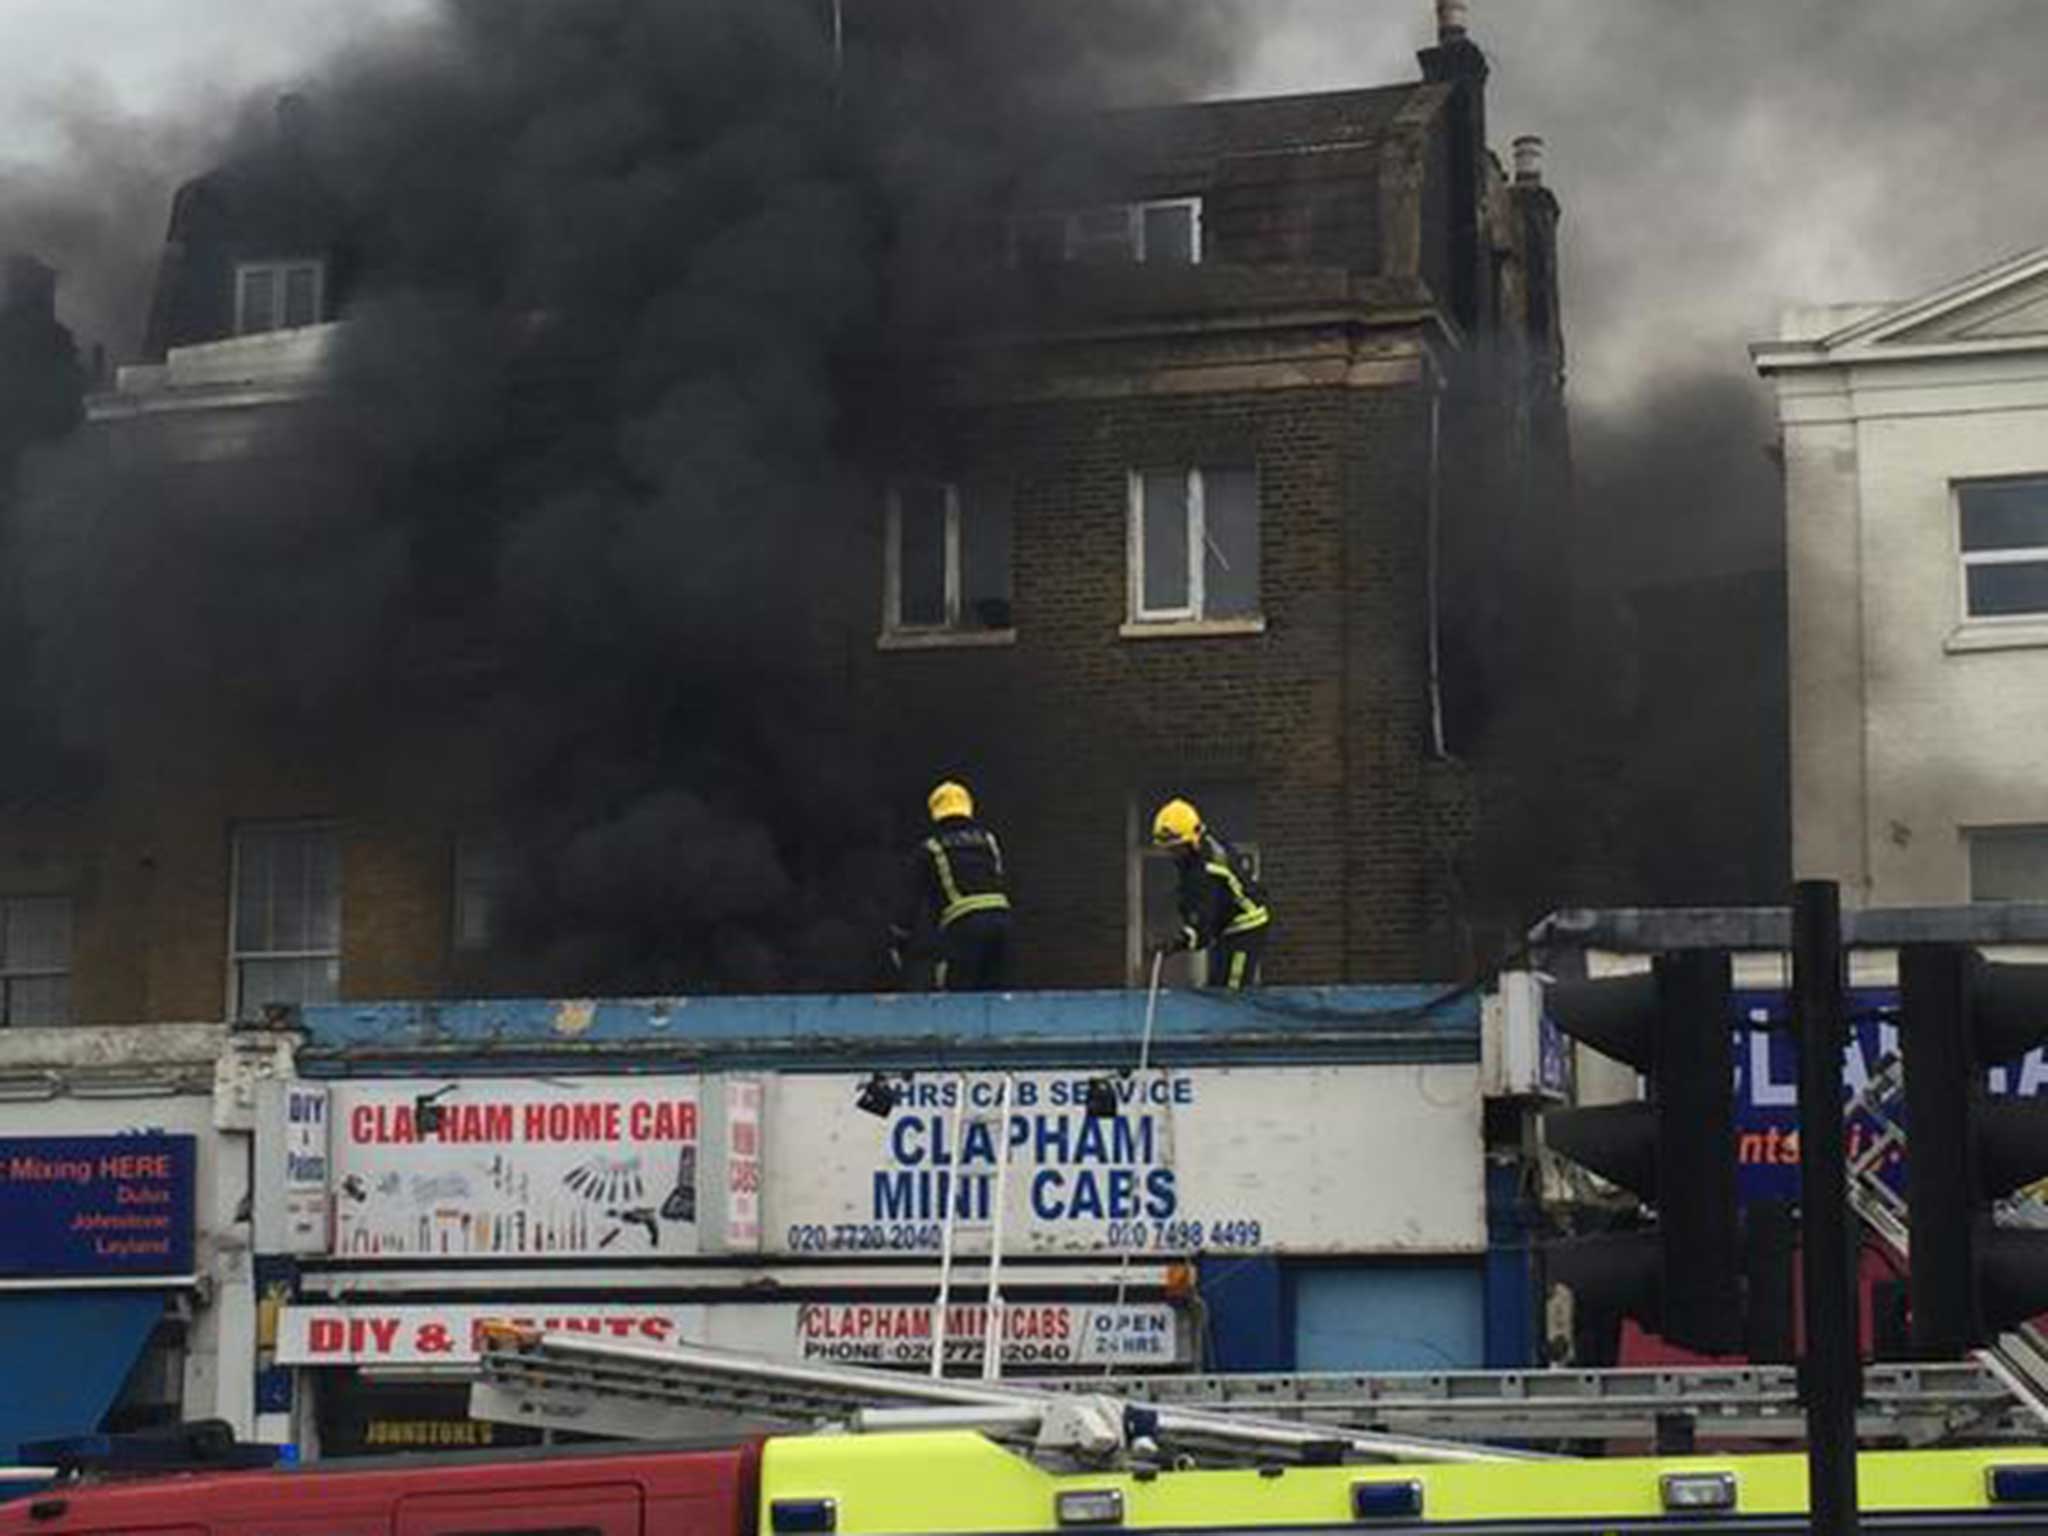 Fire fighters tackle the blaze on the busy high street